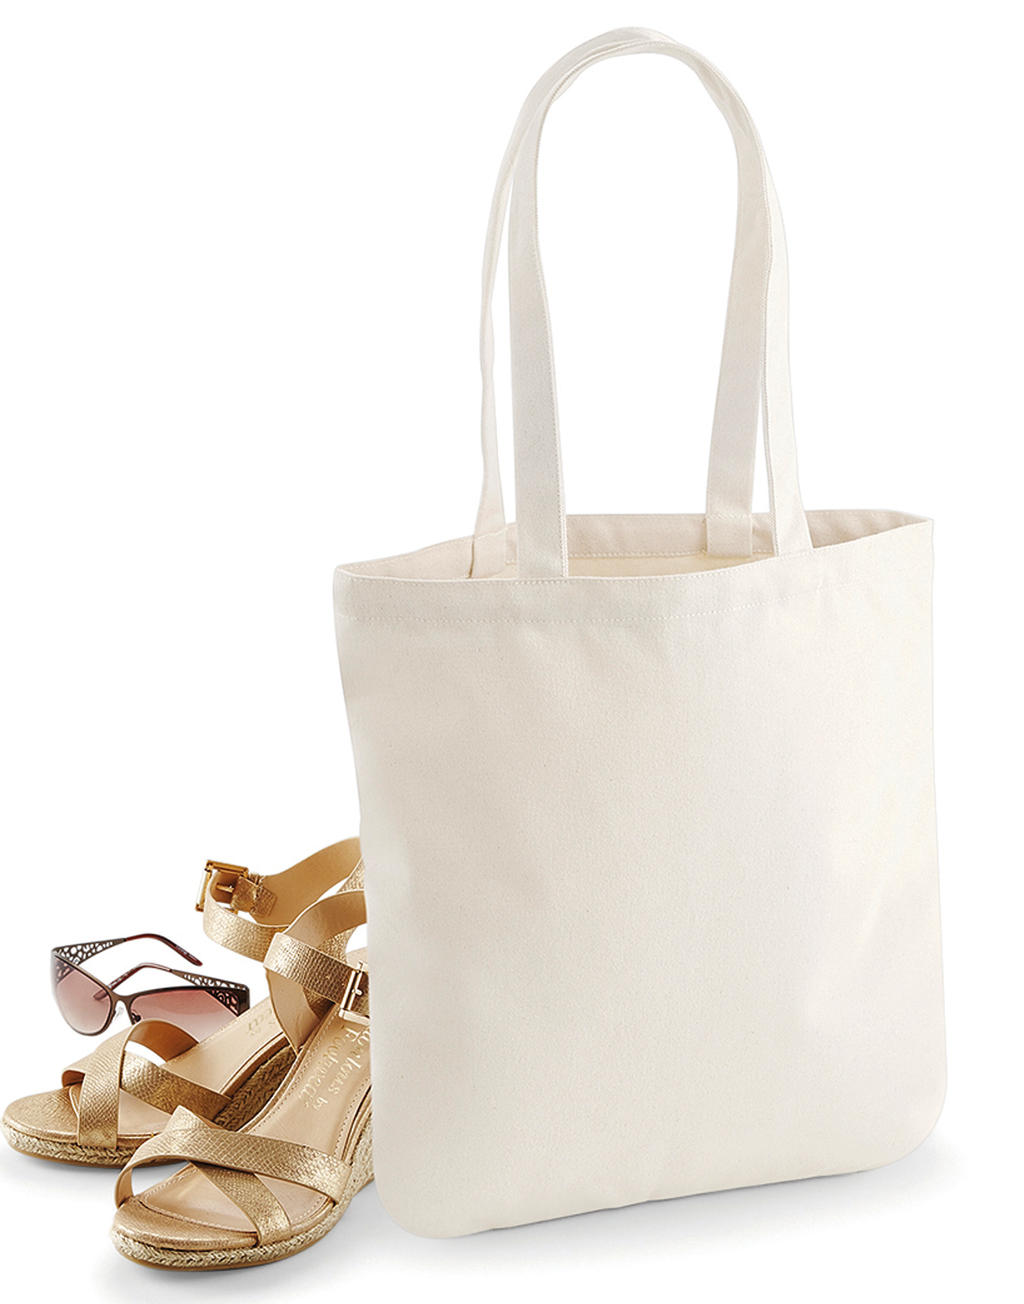  EarthAware? Organic Spring Tote in Farbe Natural